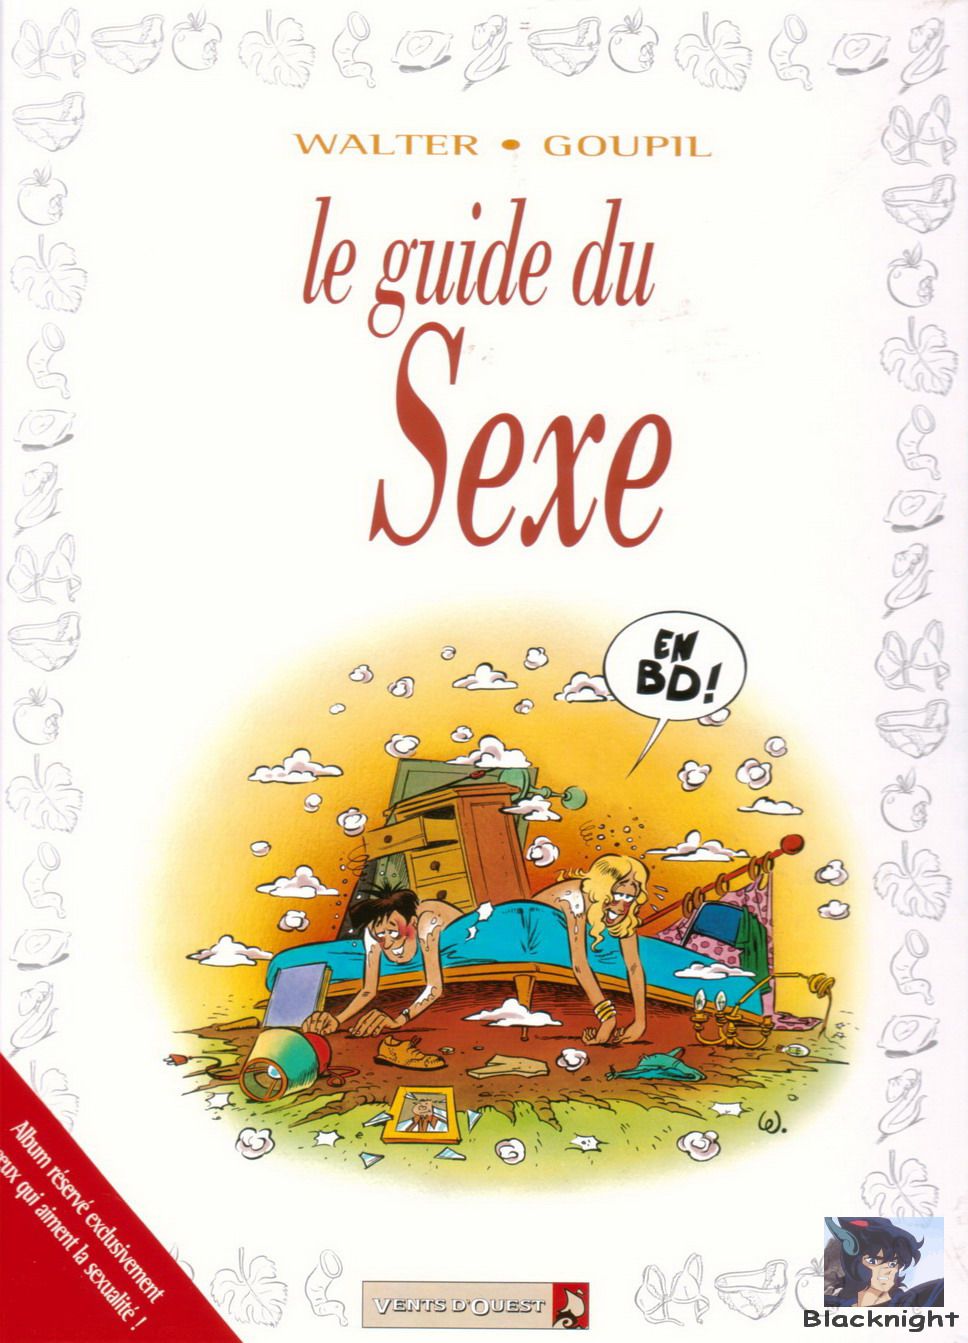 [Walter, Goupil] le guide du Sexe [French] 1